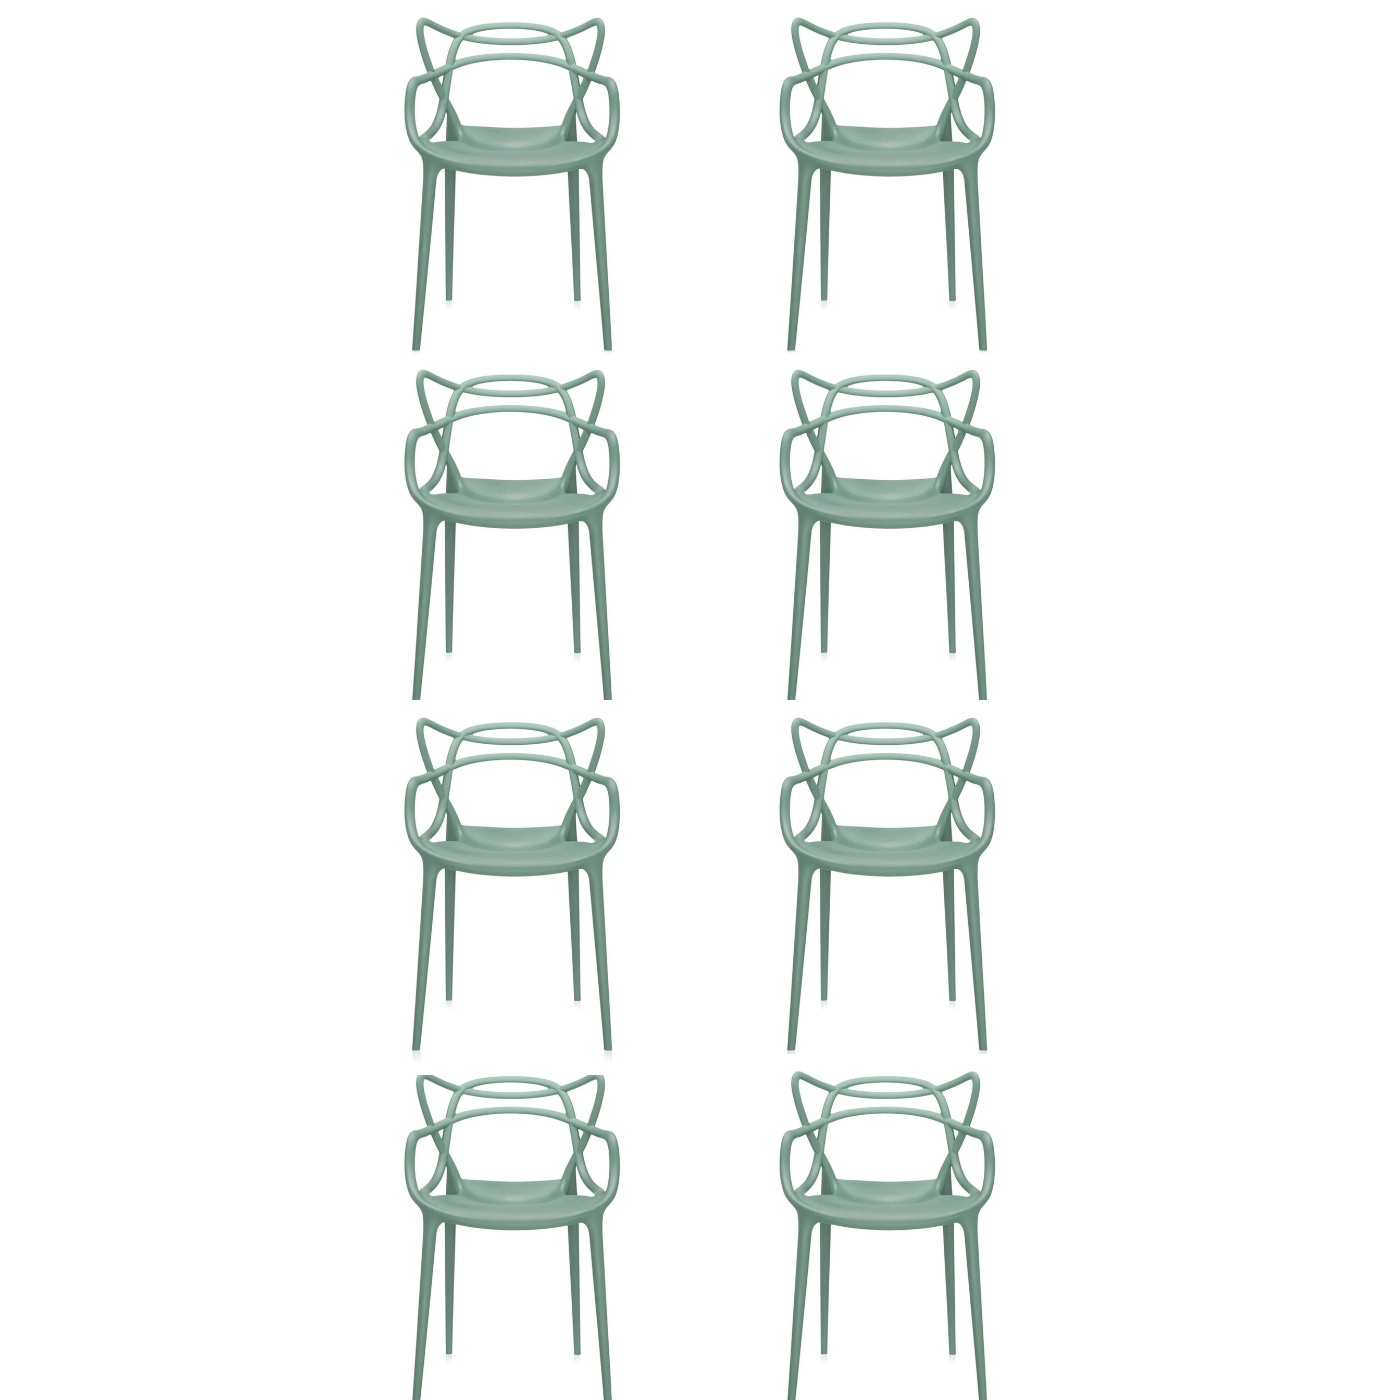 Kartell Masters Dining Chair Bundle Set Of 8 Chairs Sage Green Designer Furniture From Holloways Of Ludlow